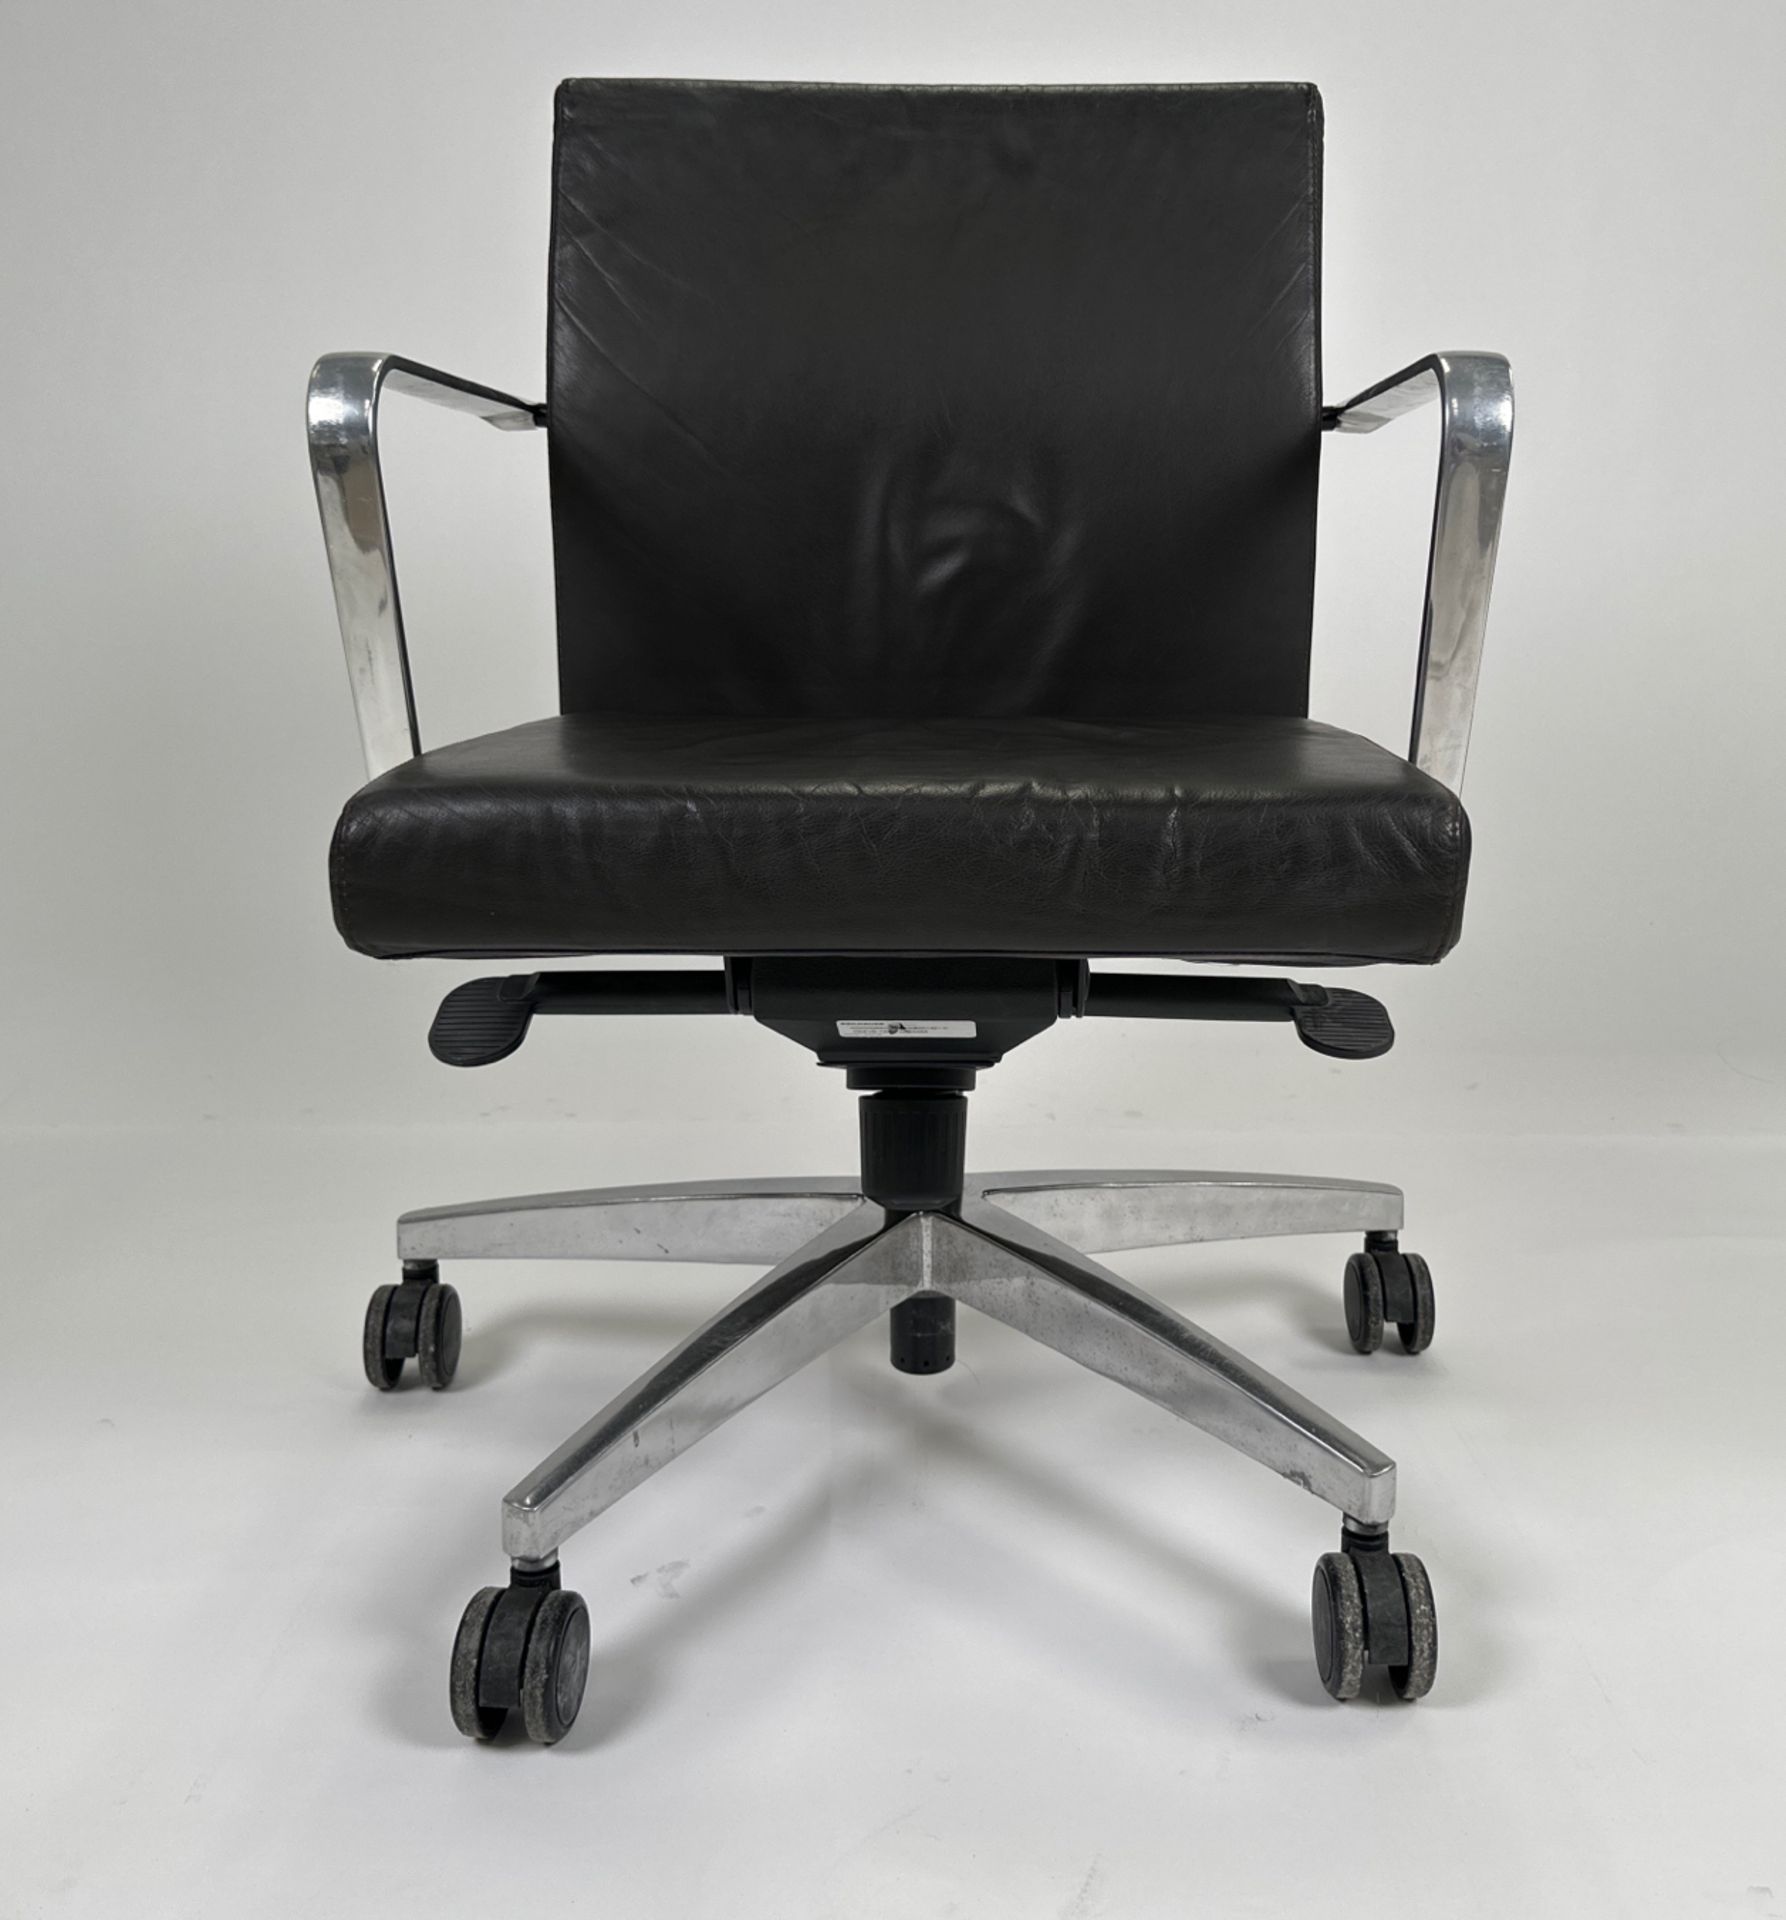 Keilhauer Adjustable Leather Office Chair - Image 2 of 3